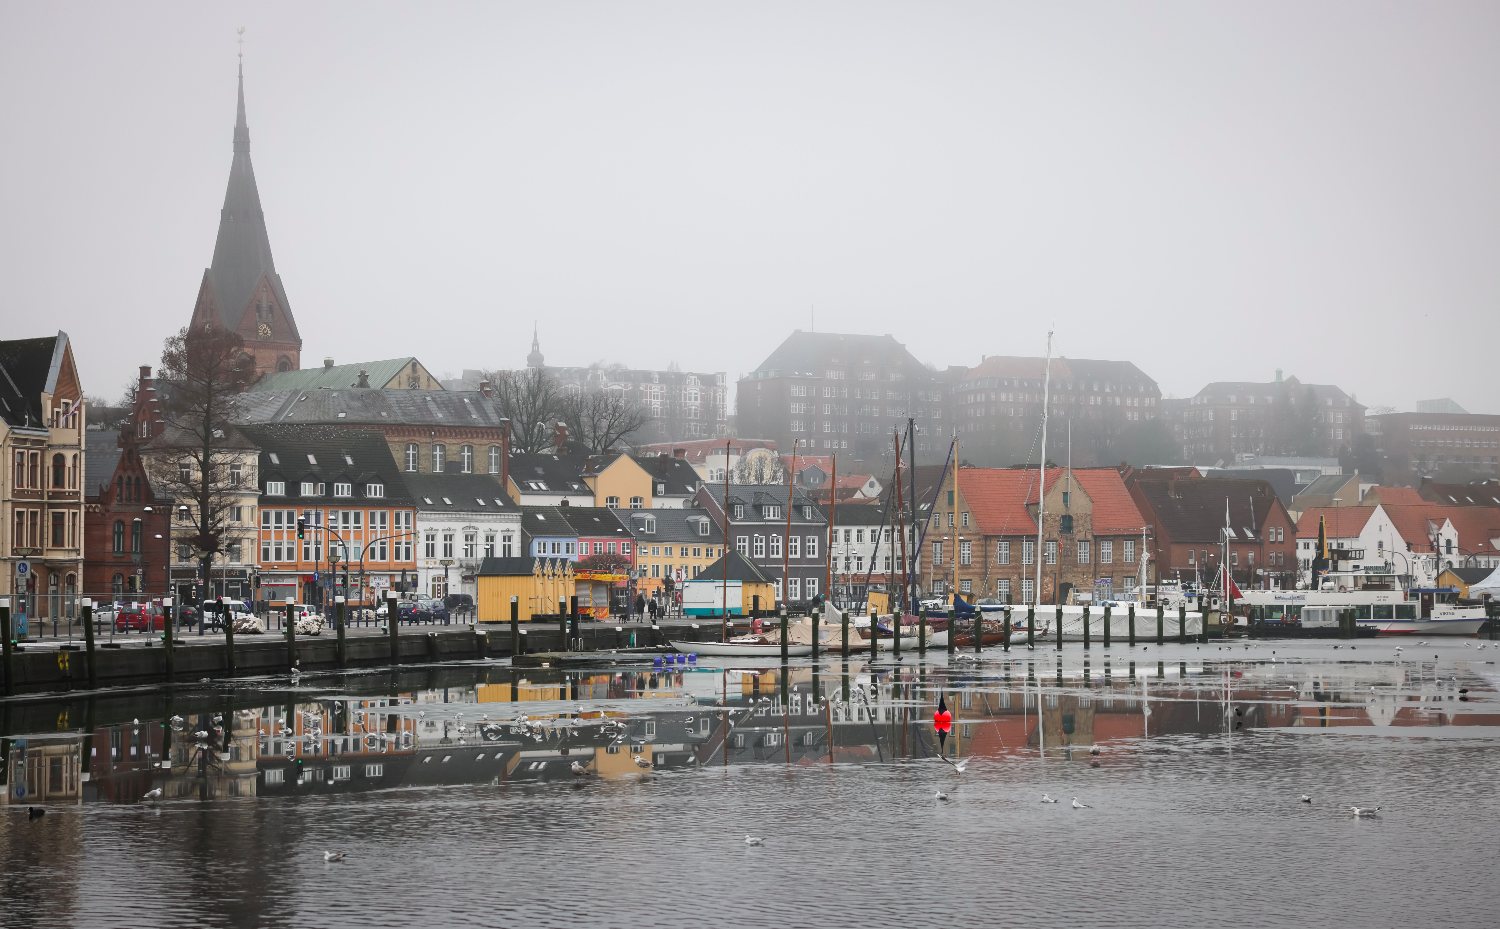 Covid-19 variant: Is the Flensburg outbreak a red flag for Germany?